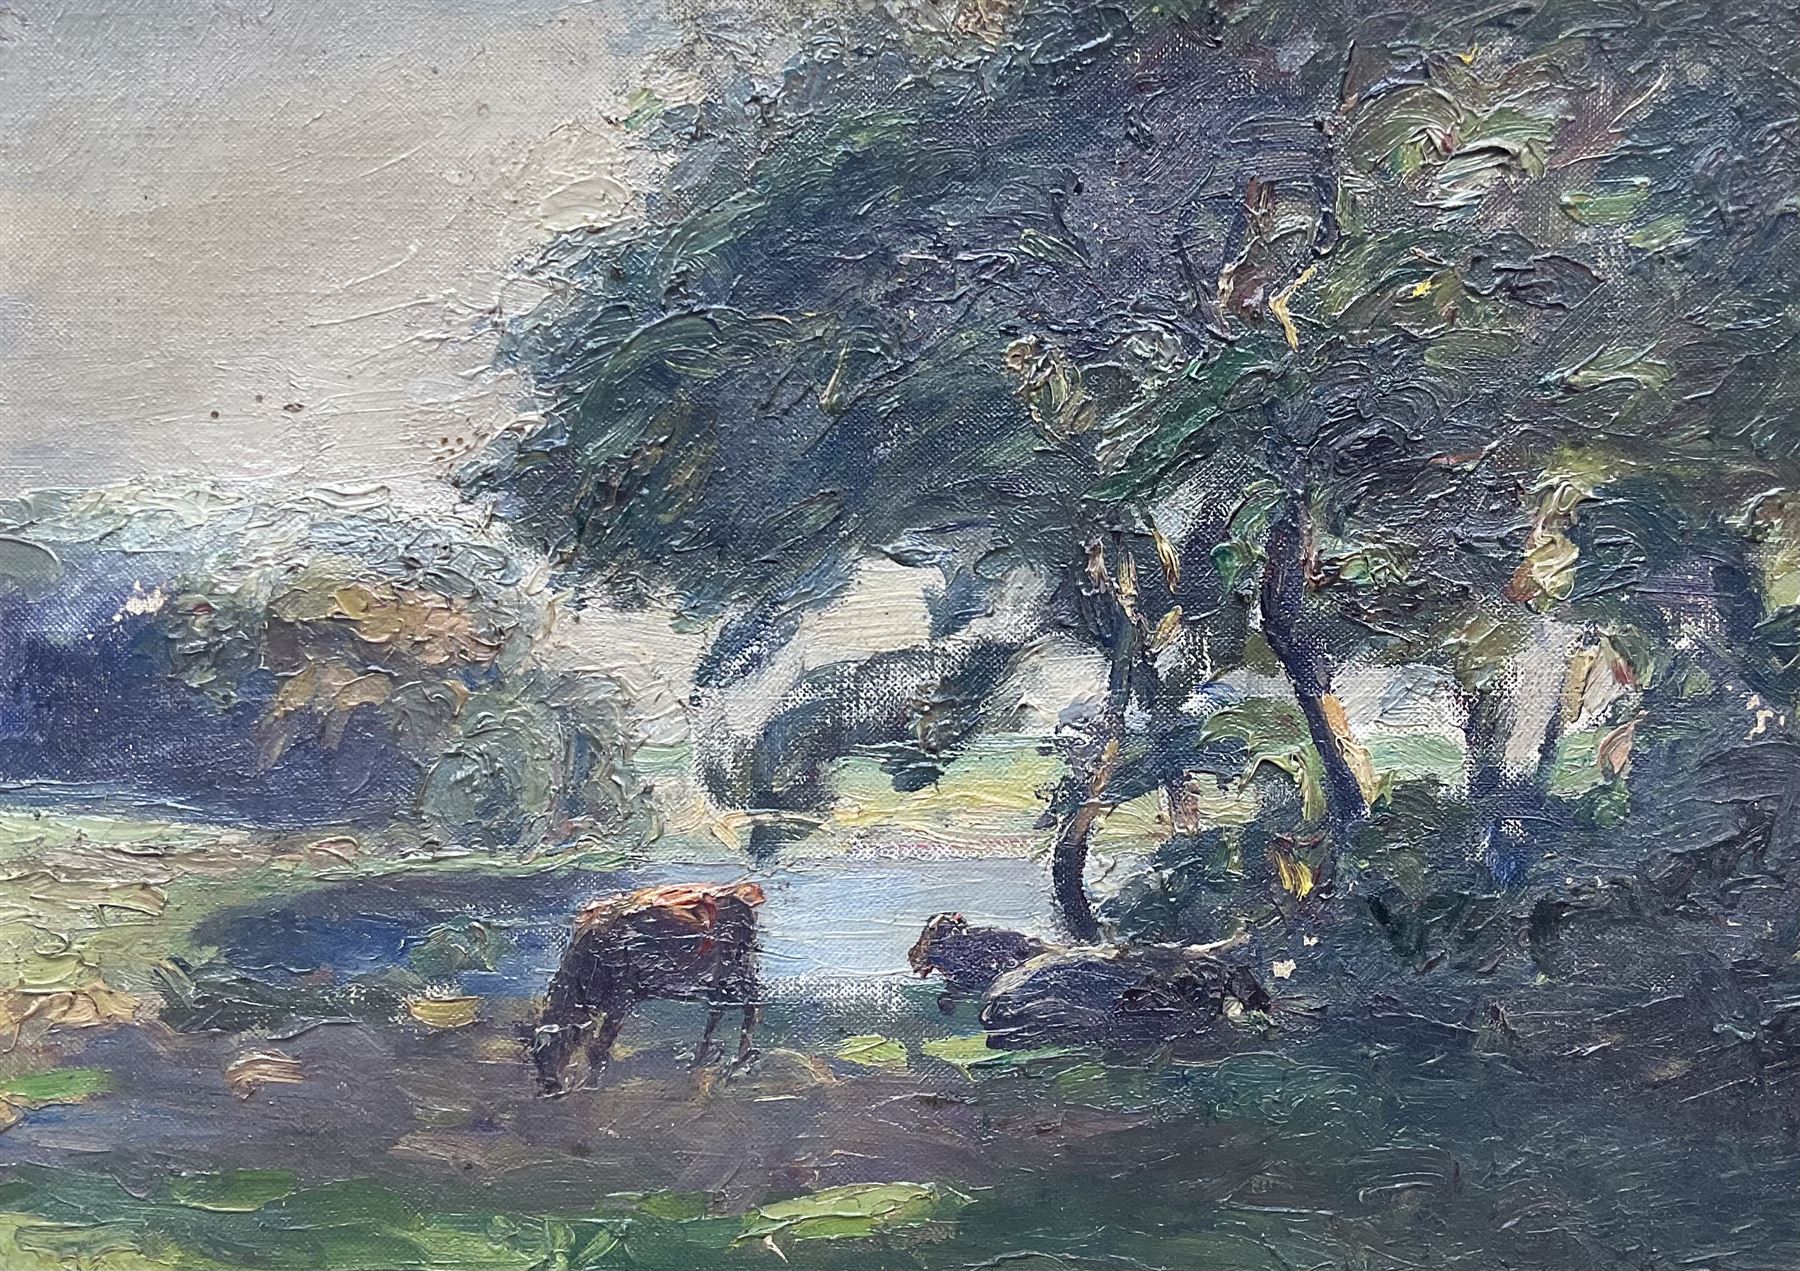 English School (Early 20th century): Cattle Watering by Trees